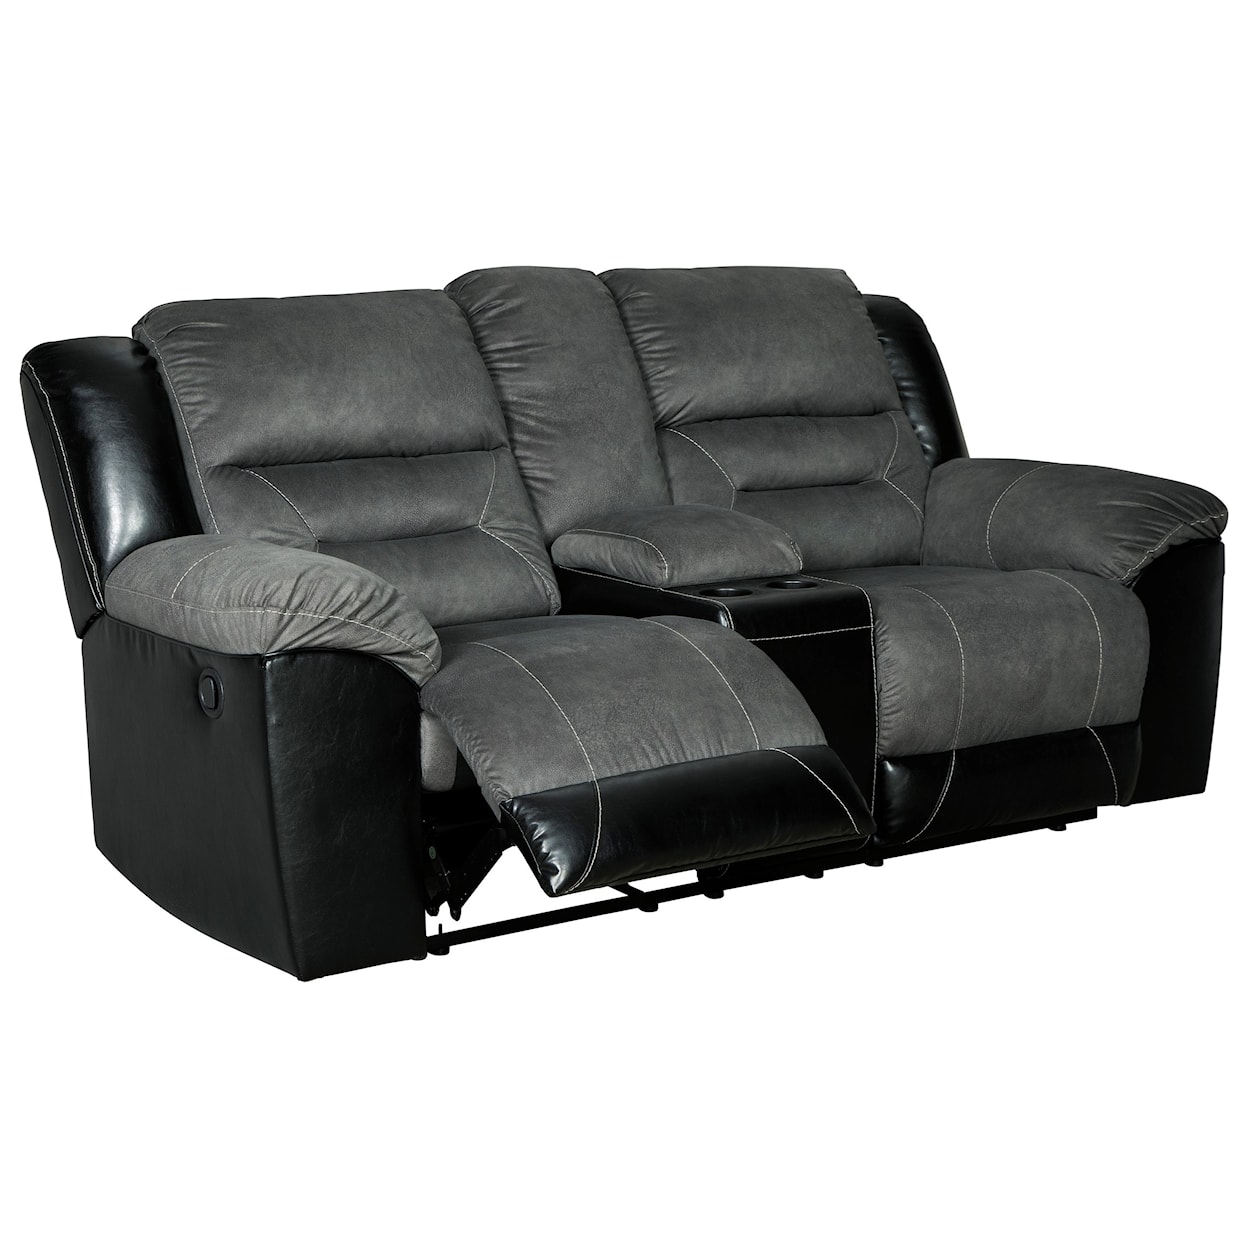 Signature Design by Ashley Earhart Reclining Loveseat with Console